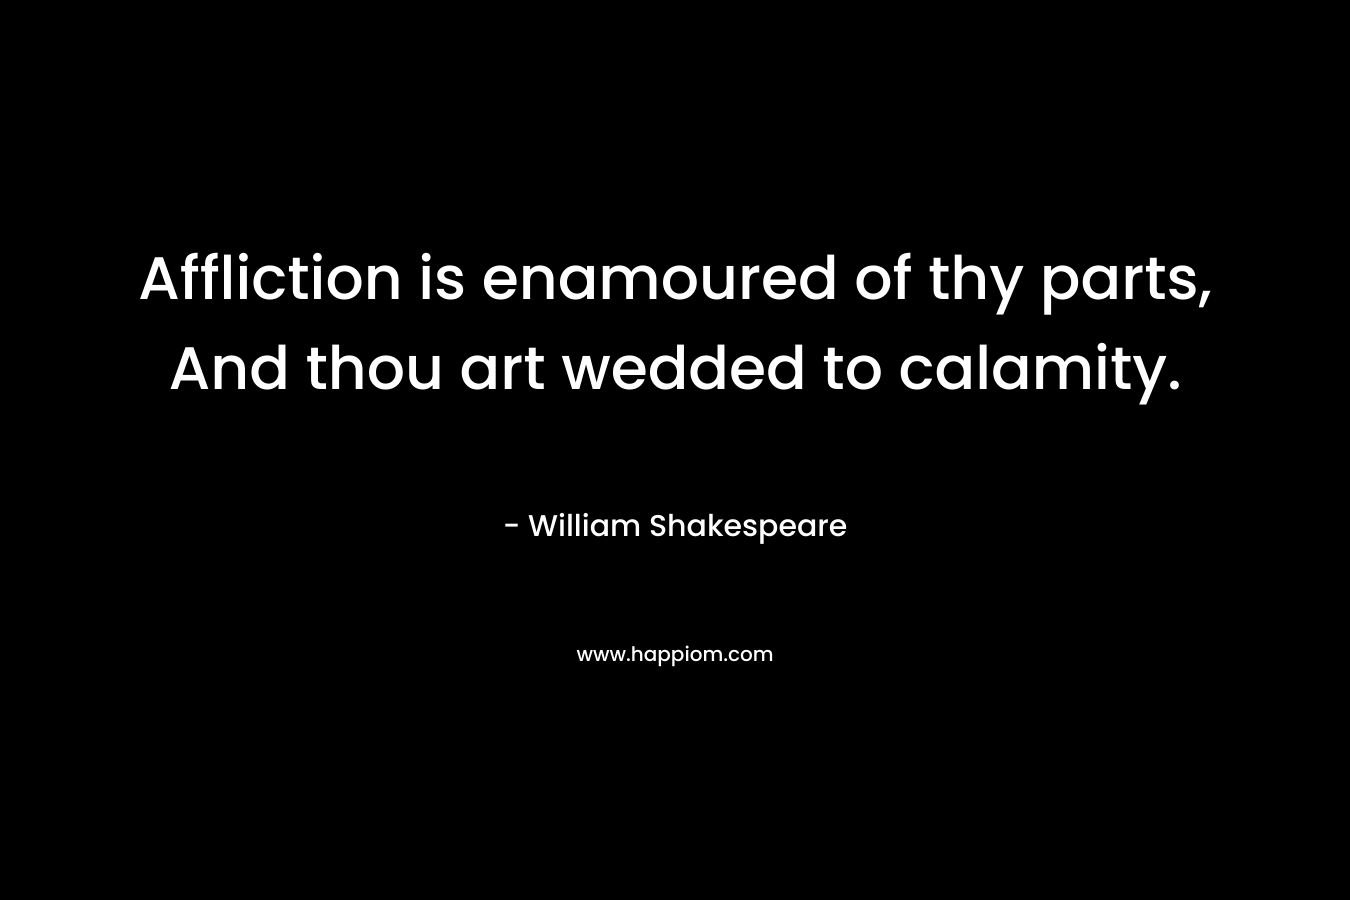 Affliction is enamoured of thy parts, And thou art wedded to calamity.